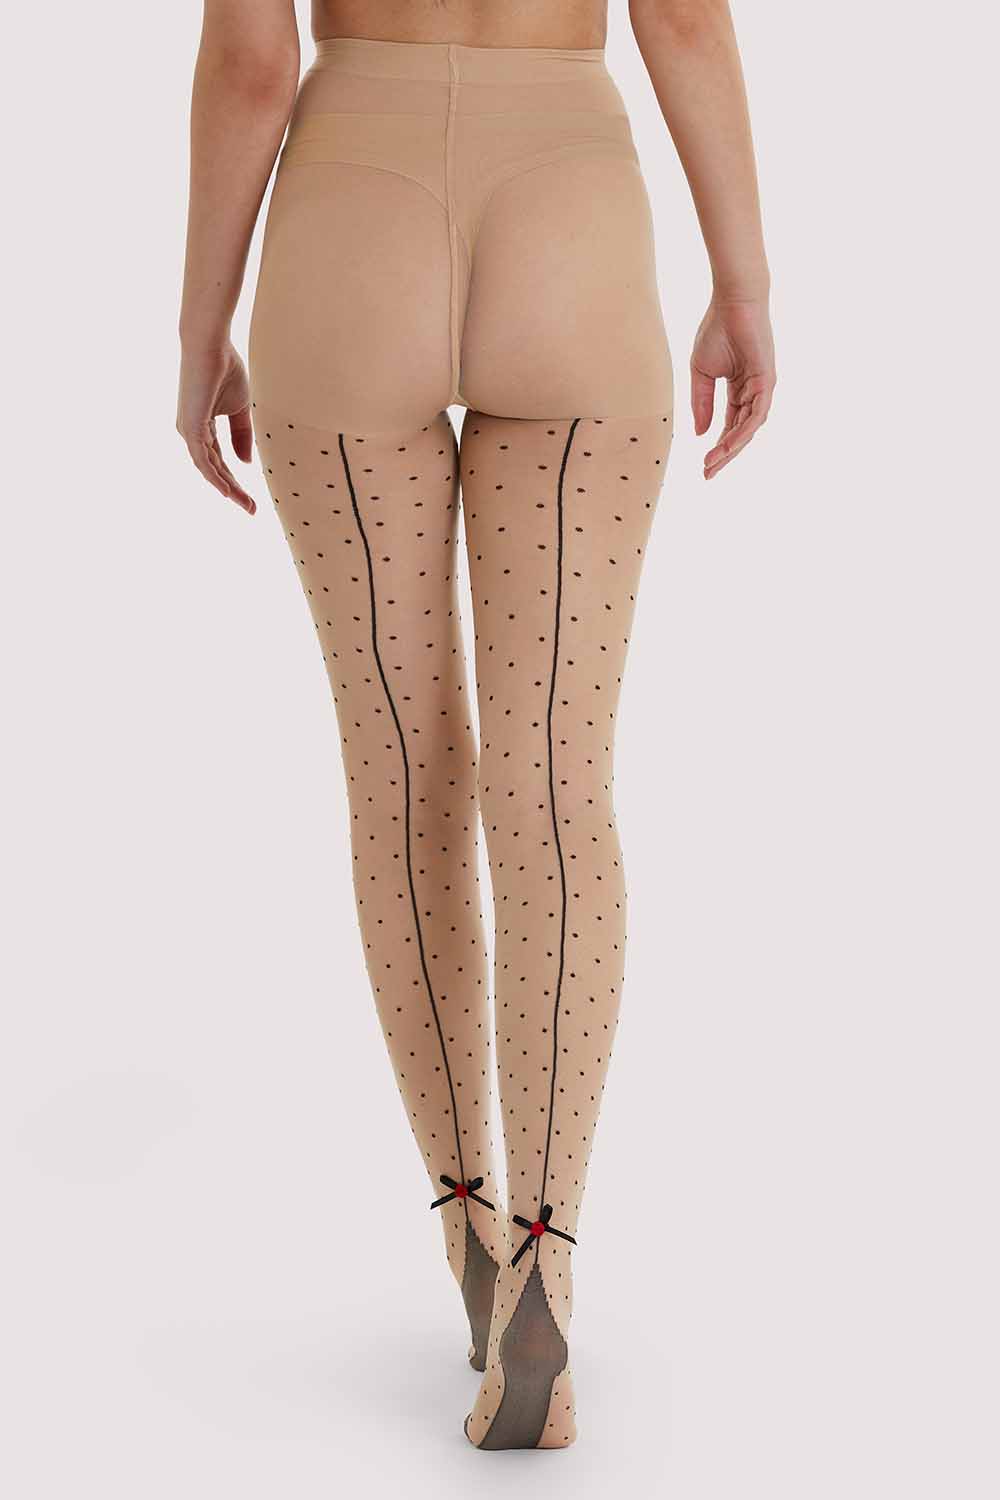 Yummy Bee - Fishnet Tights Women - Black Seamed Tights - Back Seam - Ankle  Bows